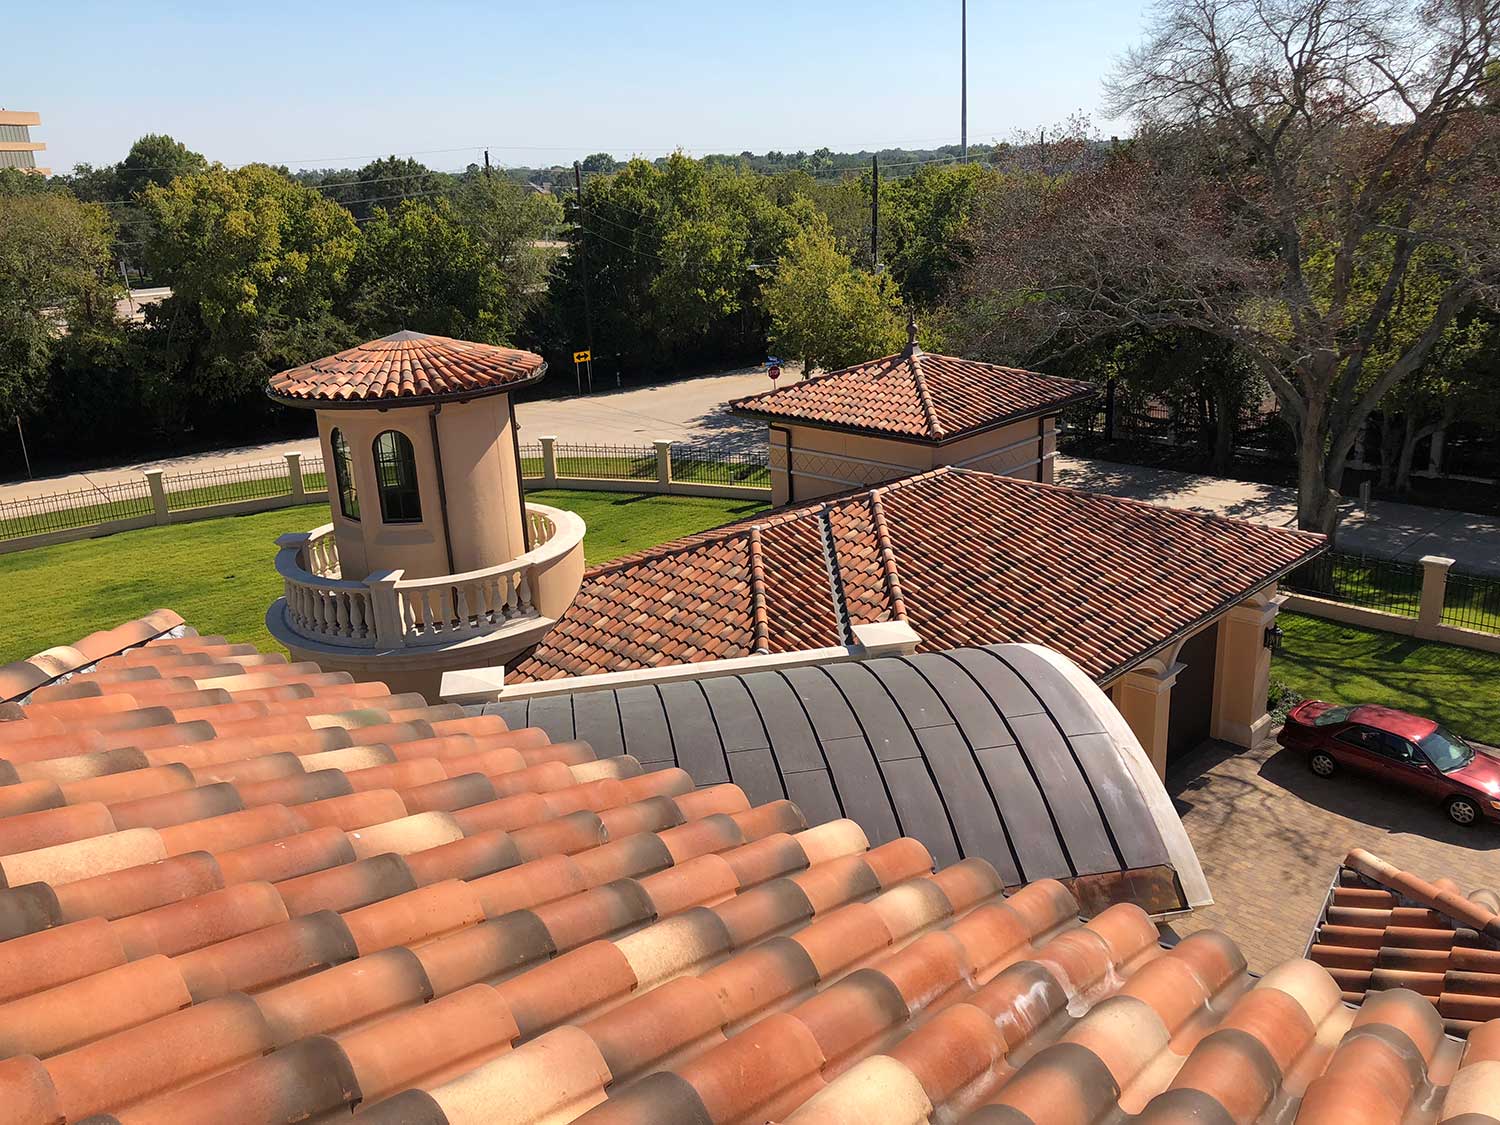 Tile Roofs Of Texas